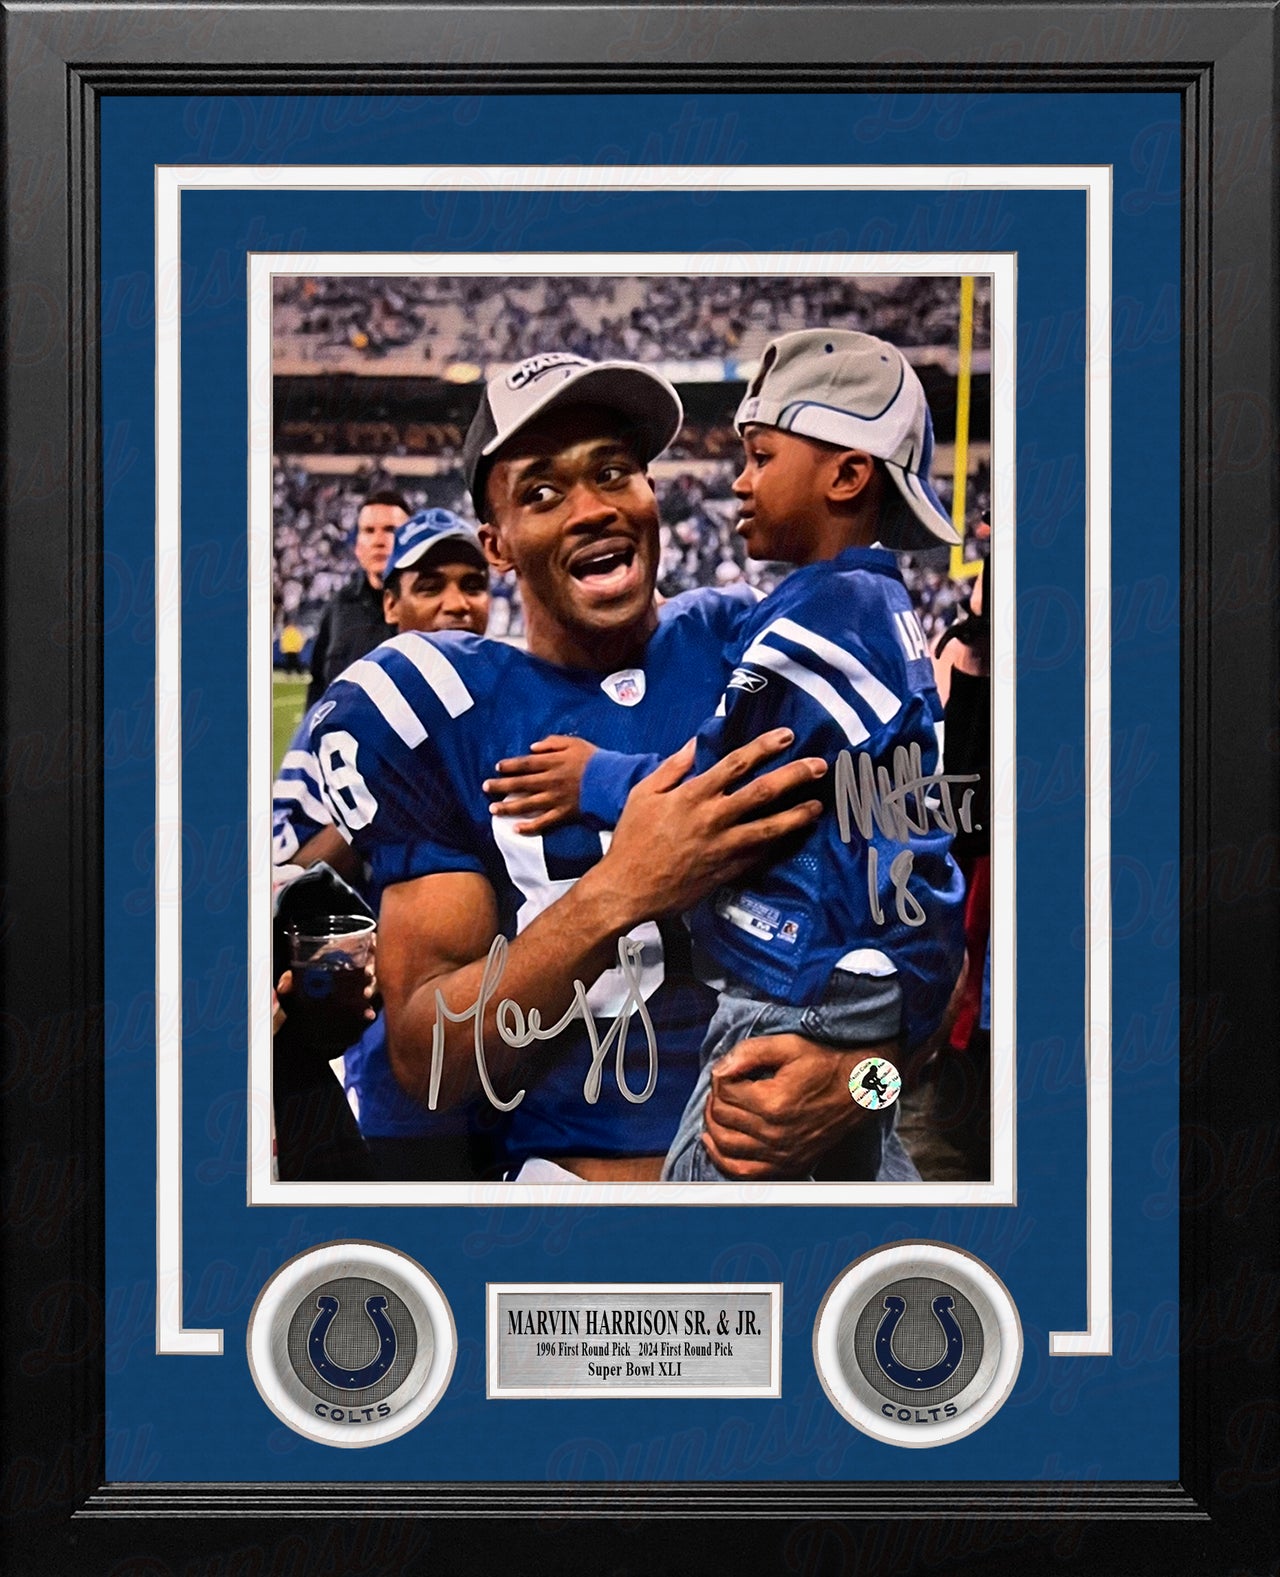 Marvin Harrison, Sr. & Jr. Indianapolis Colts Autographed 8" x 10" Framed Football Photo